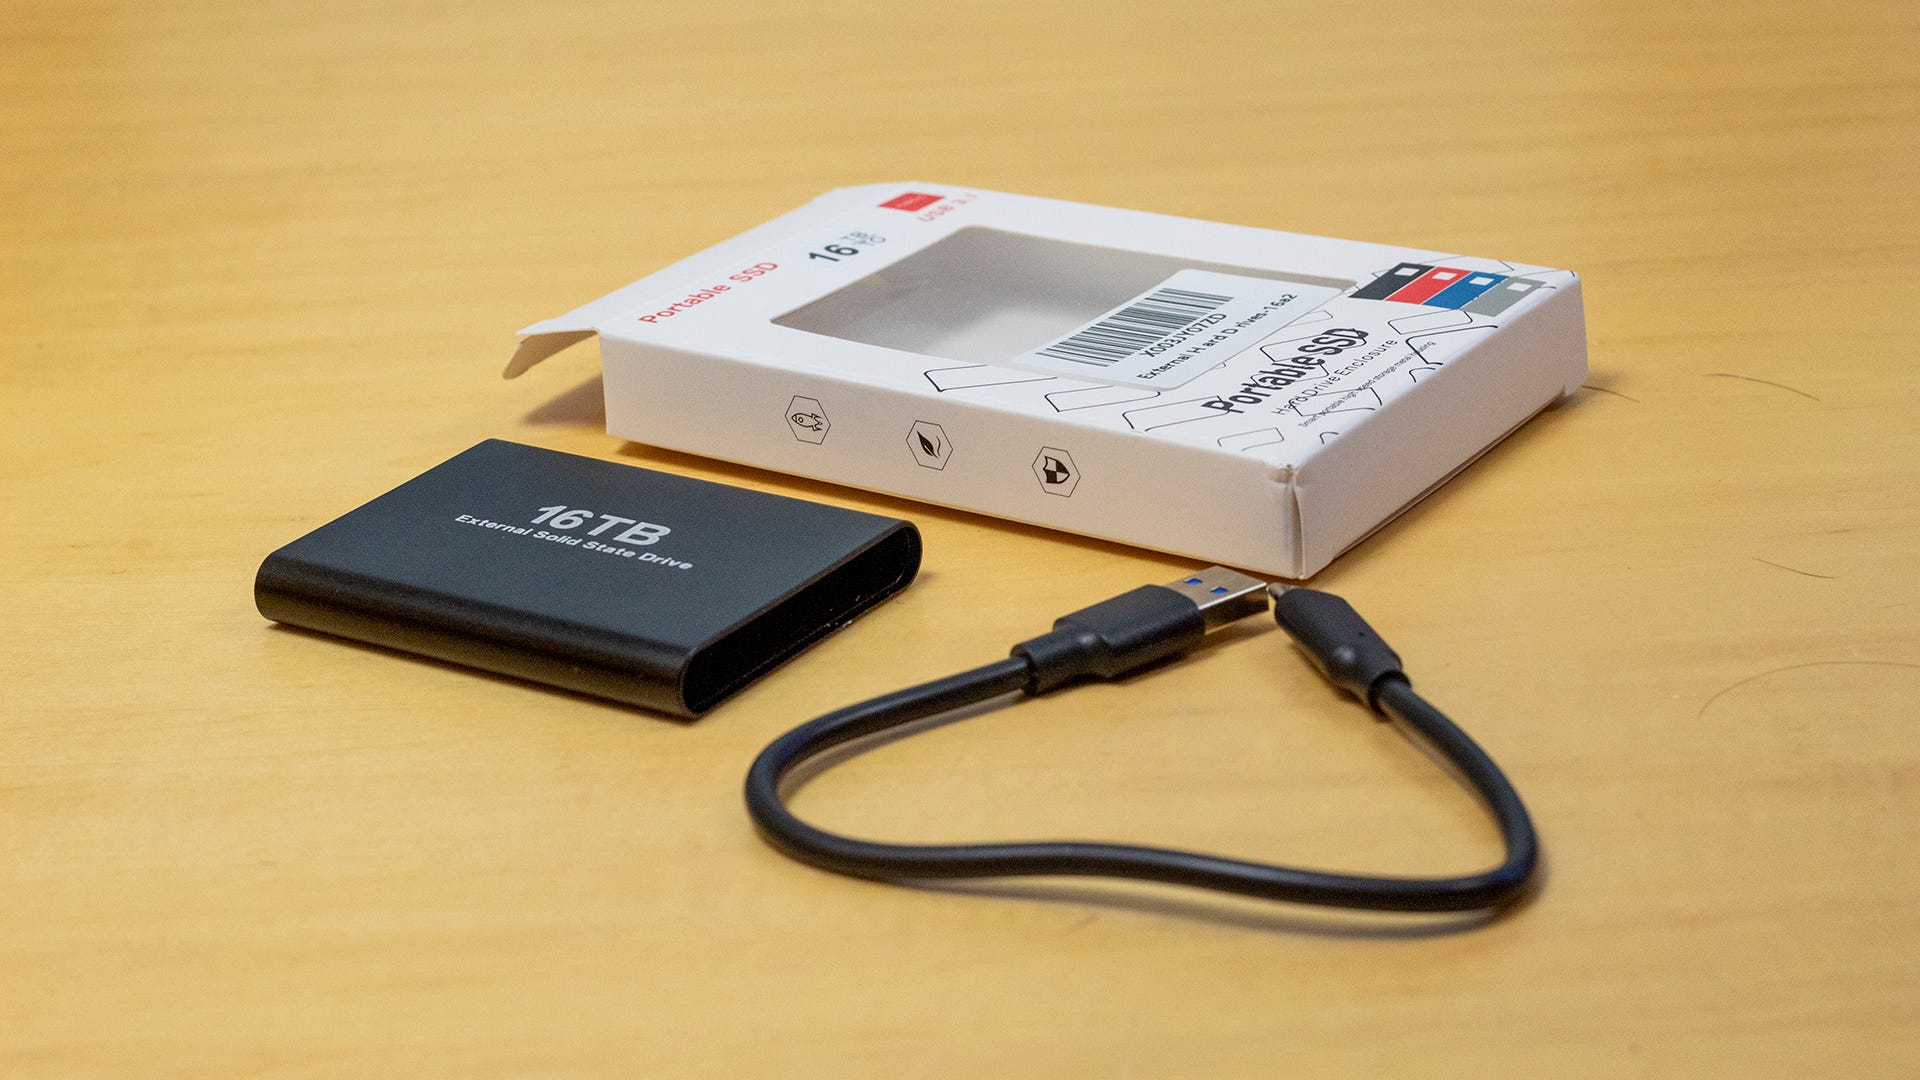 A fake SSD drive next to a box and a USB-C cord